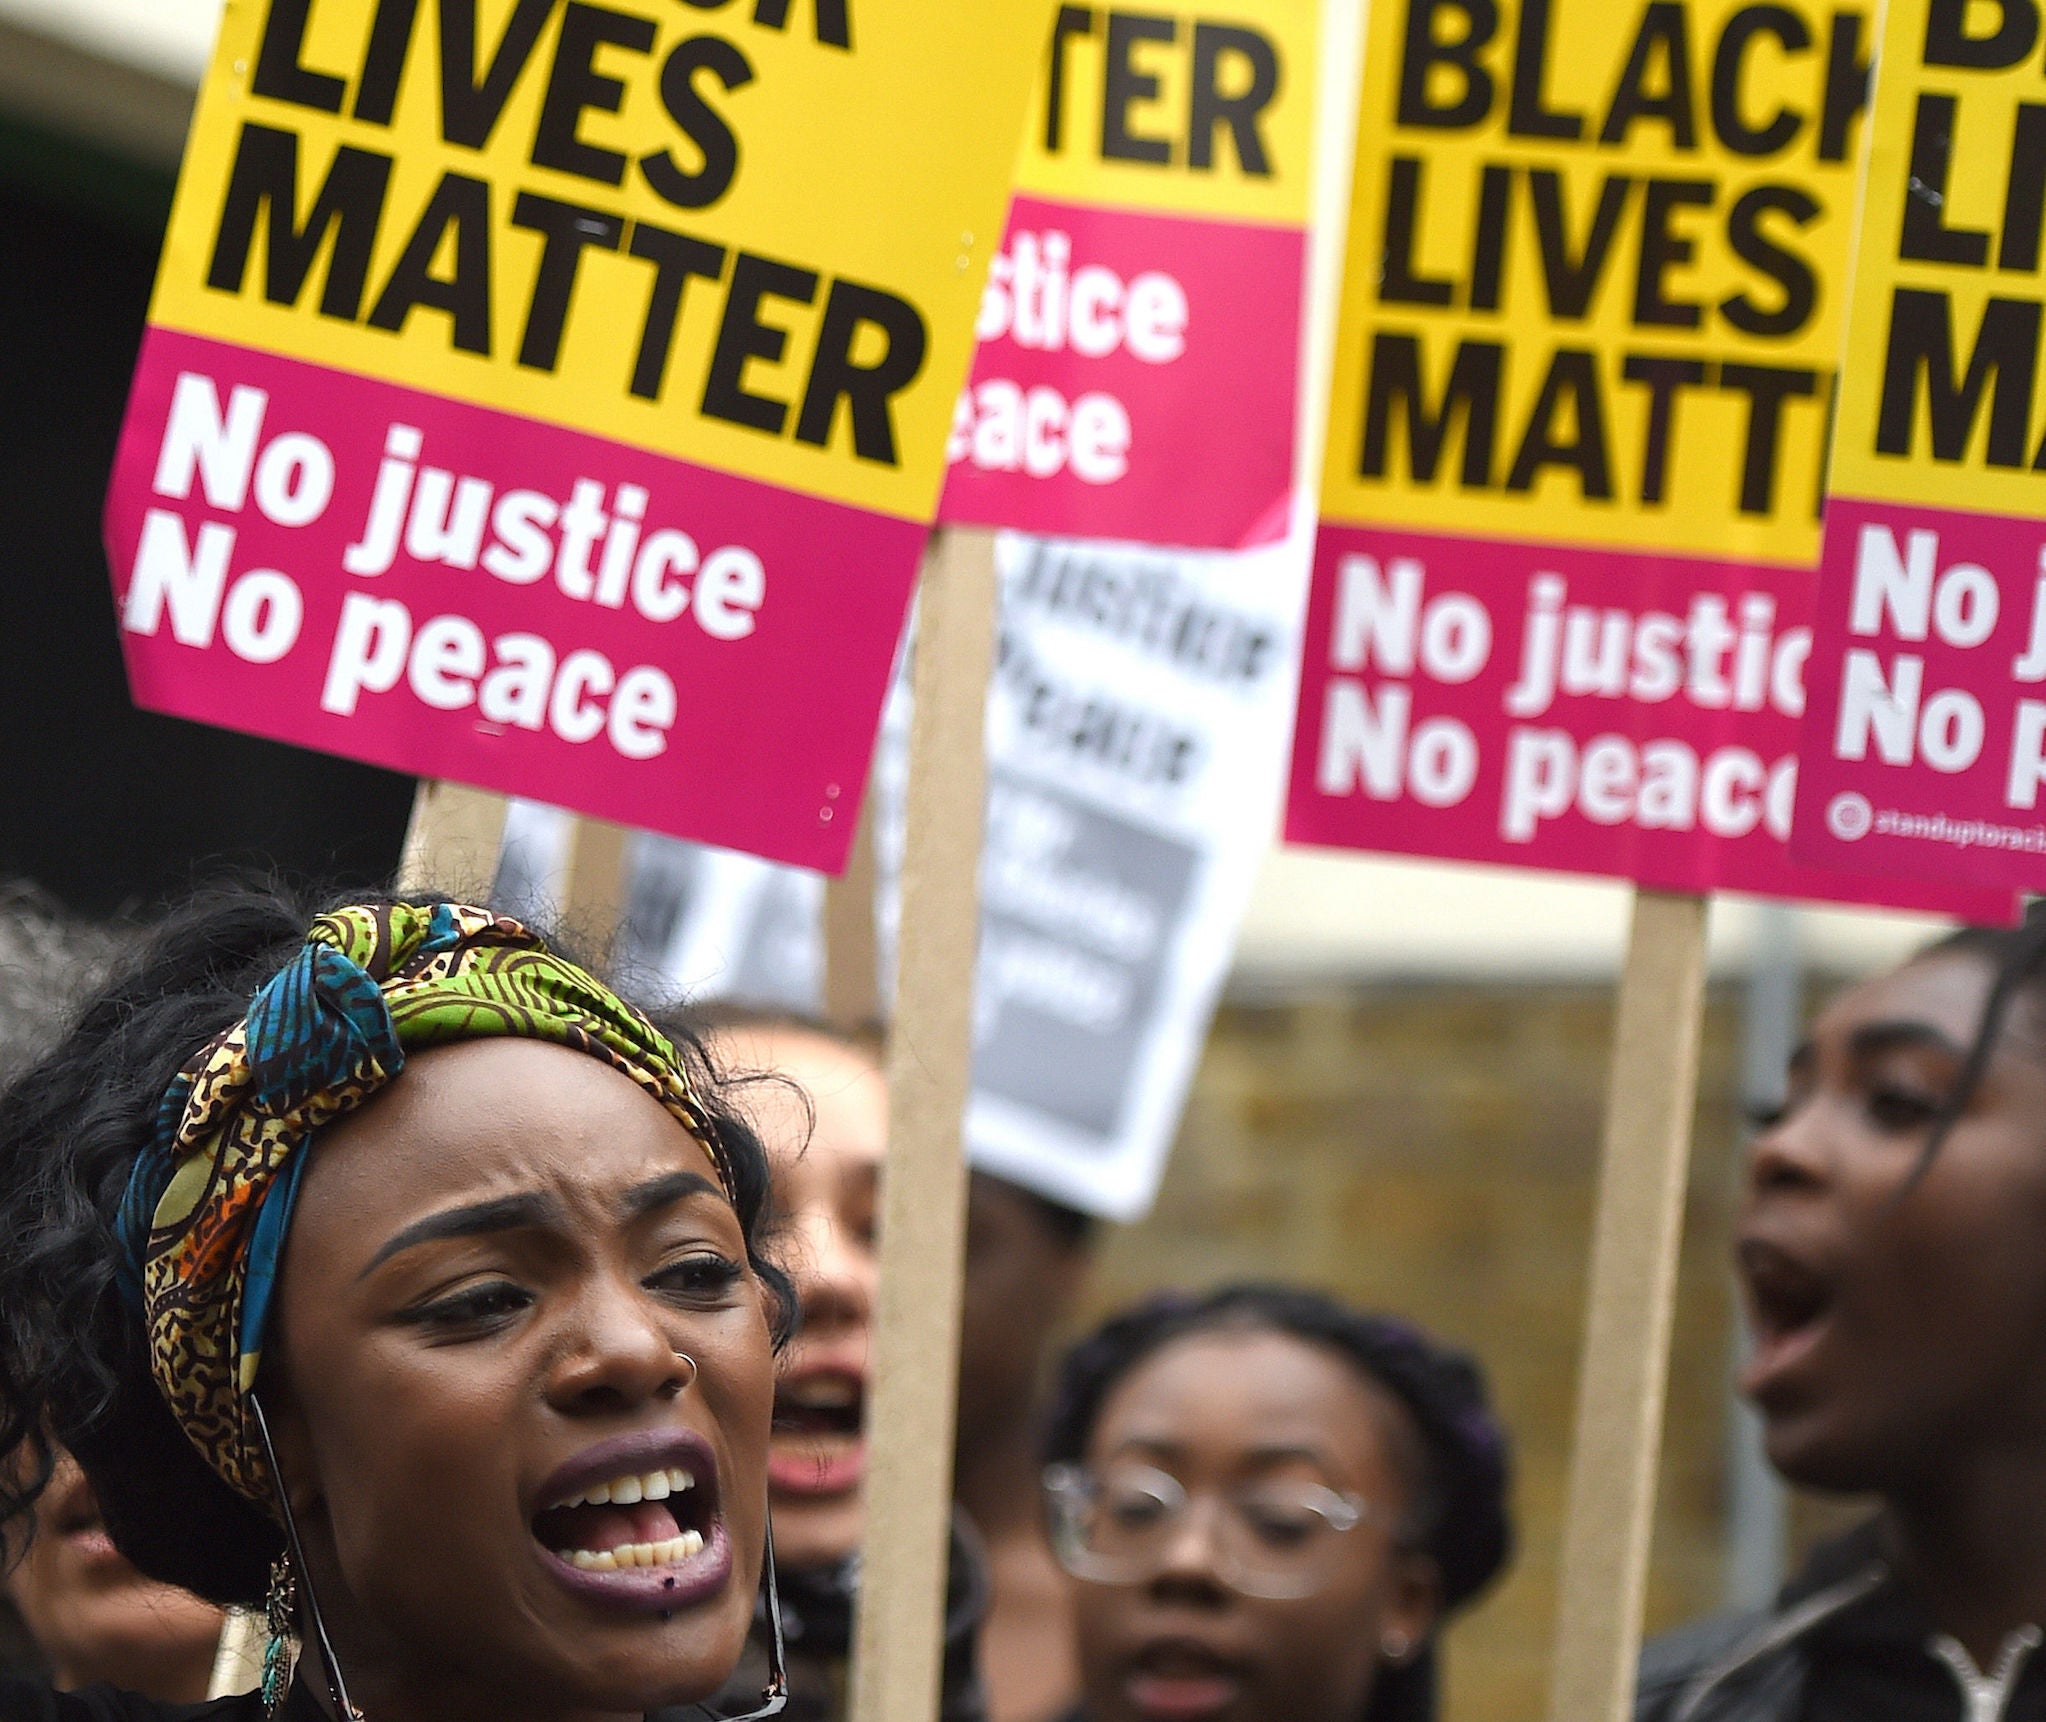 Black Lives Matter protesters took to the streets this weekend over the death of Rashan Charles